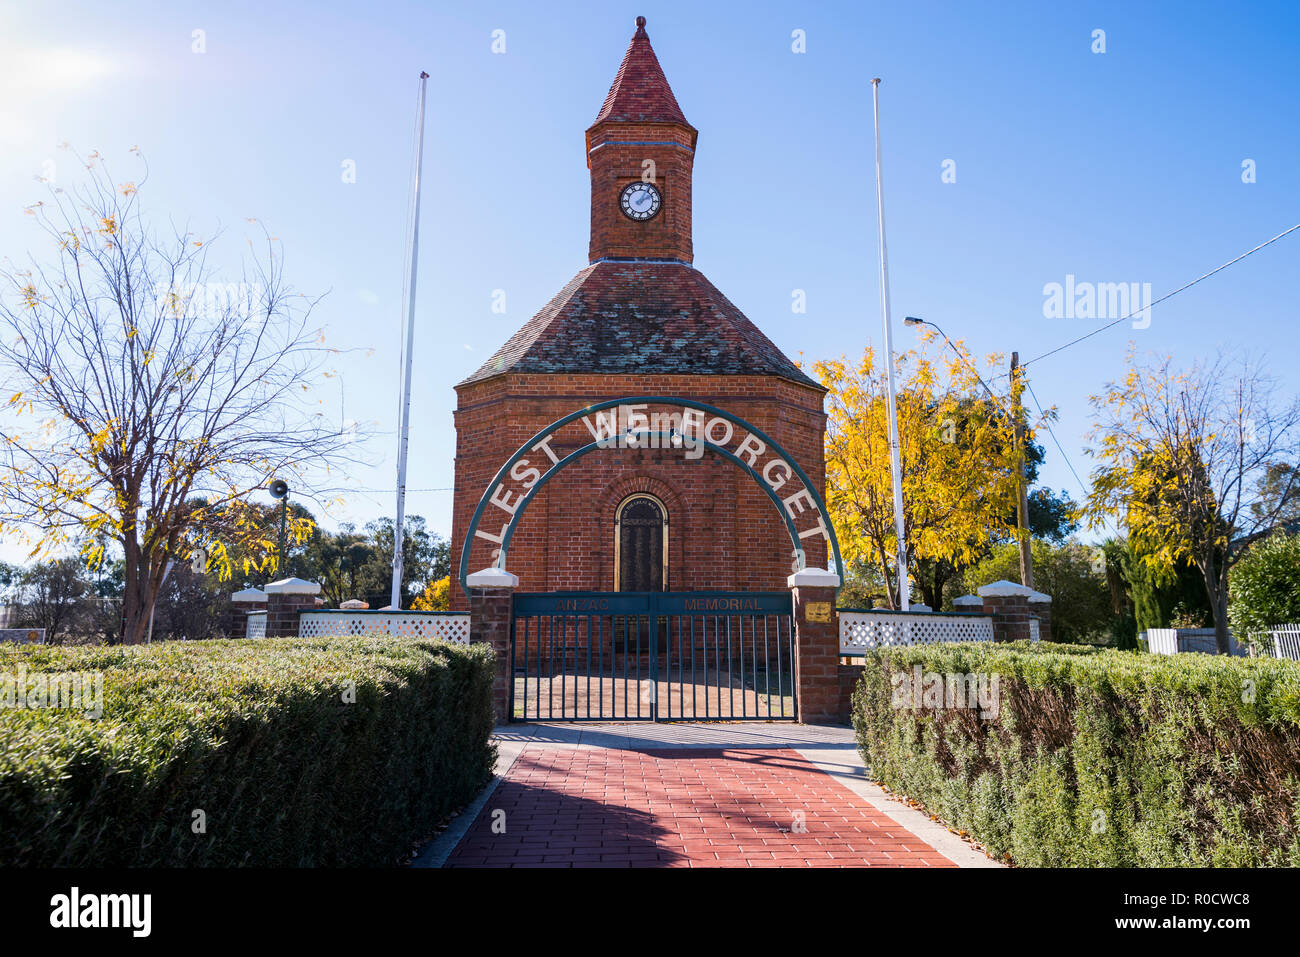 Boorowa War memorial, Hilltops Region, South West Slopes of New South Wales, Australia Stock Photo